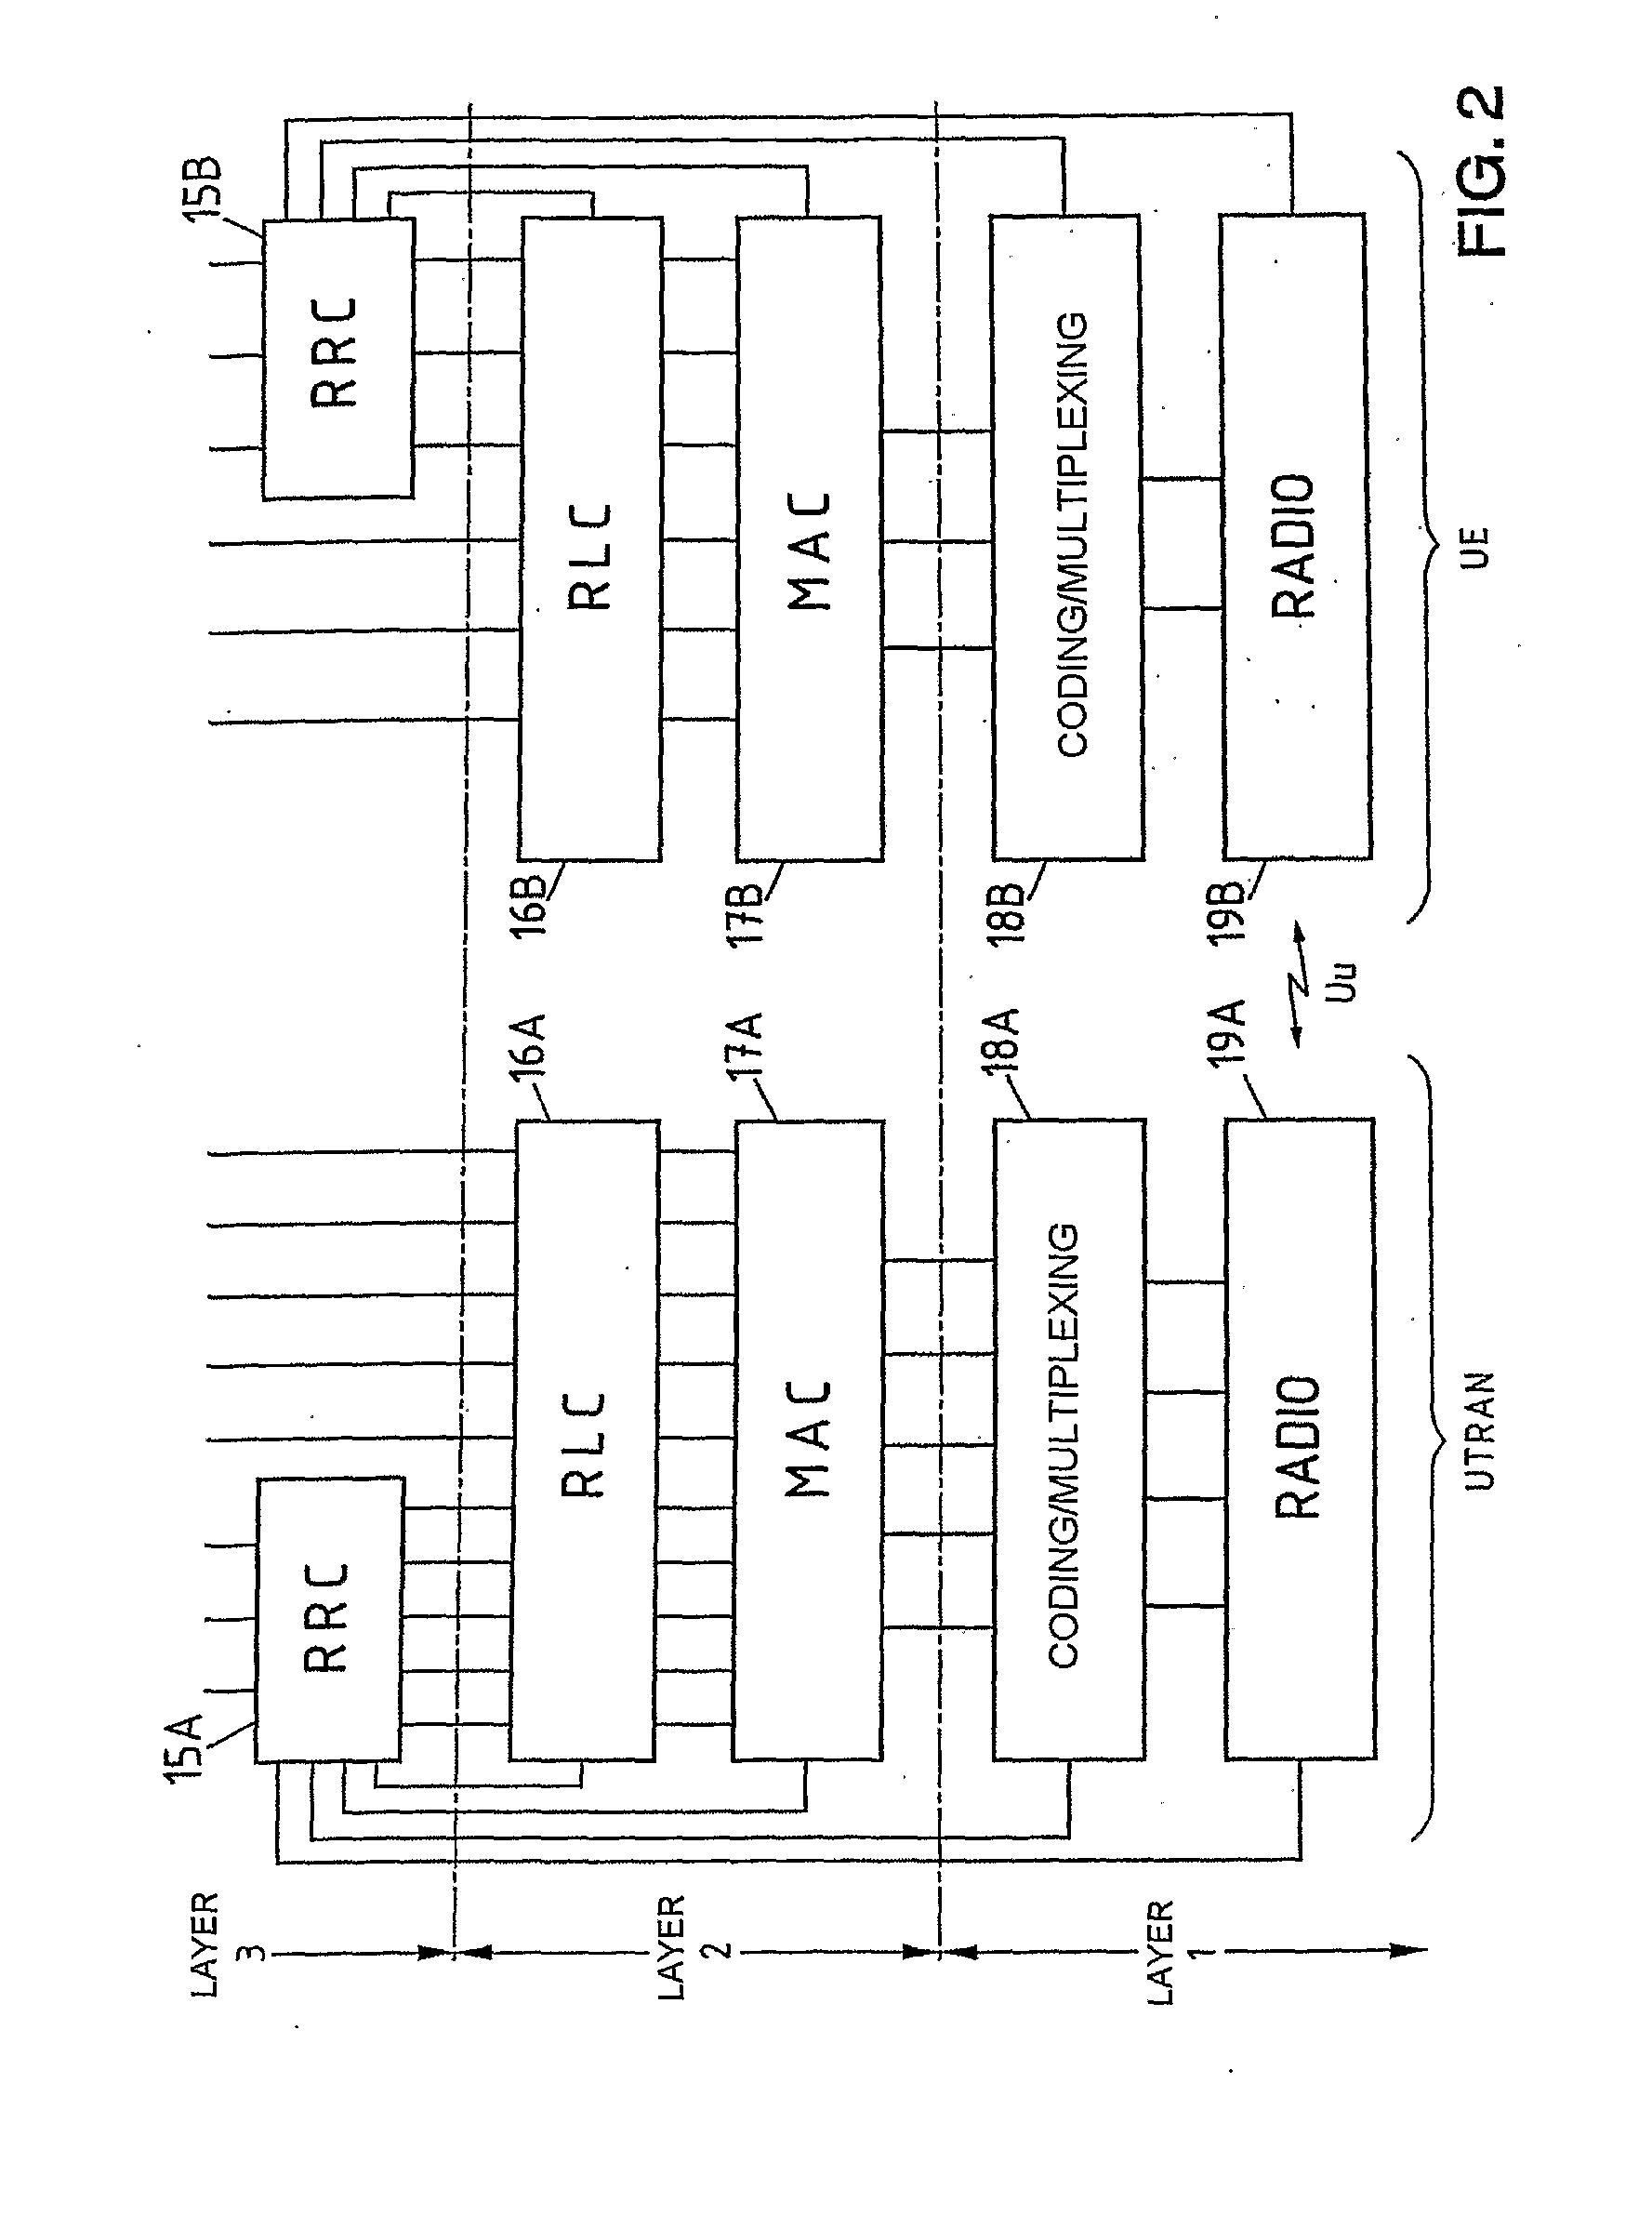 Method and Apparatus for Controlling the Transmission of Radio Links in a Radio-Communication System